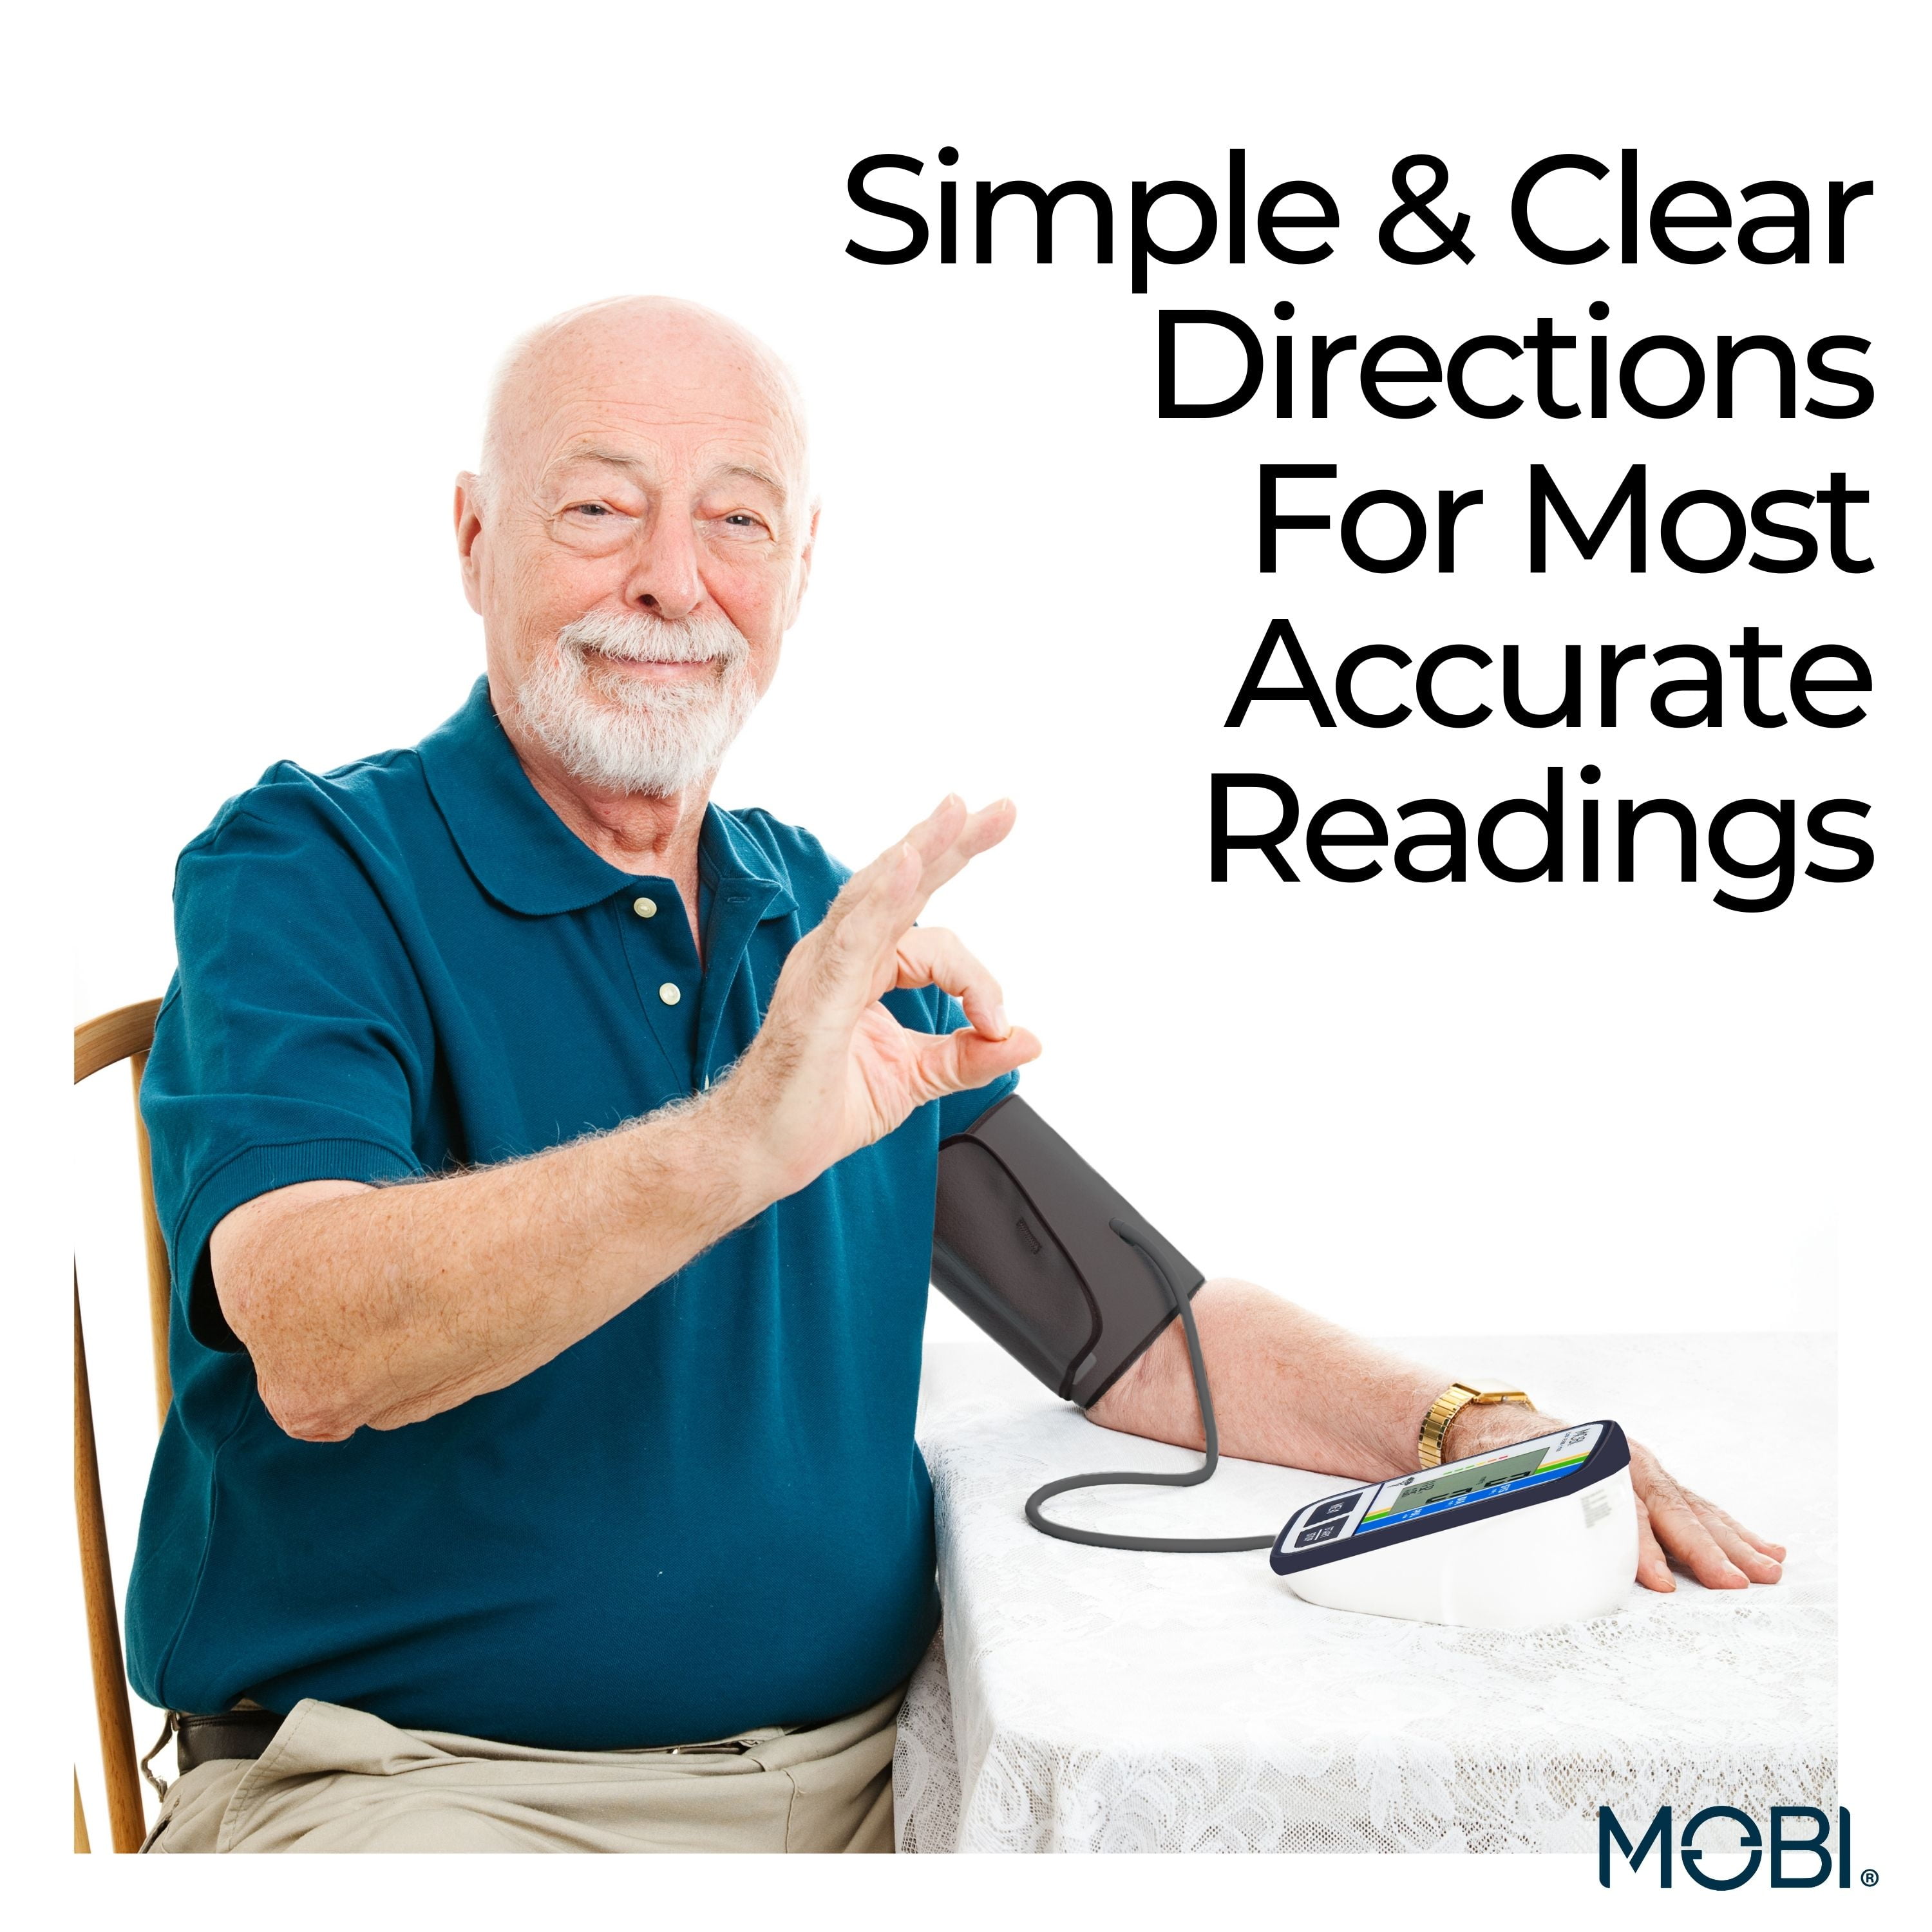 MOBI Health Wrist Blood Pressure Monitor, BP Monitor Irregular Heart Beat  Detection Cuff Automatic with Large Display Screen Support Charging Supply